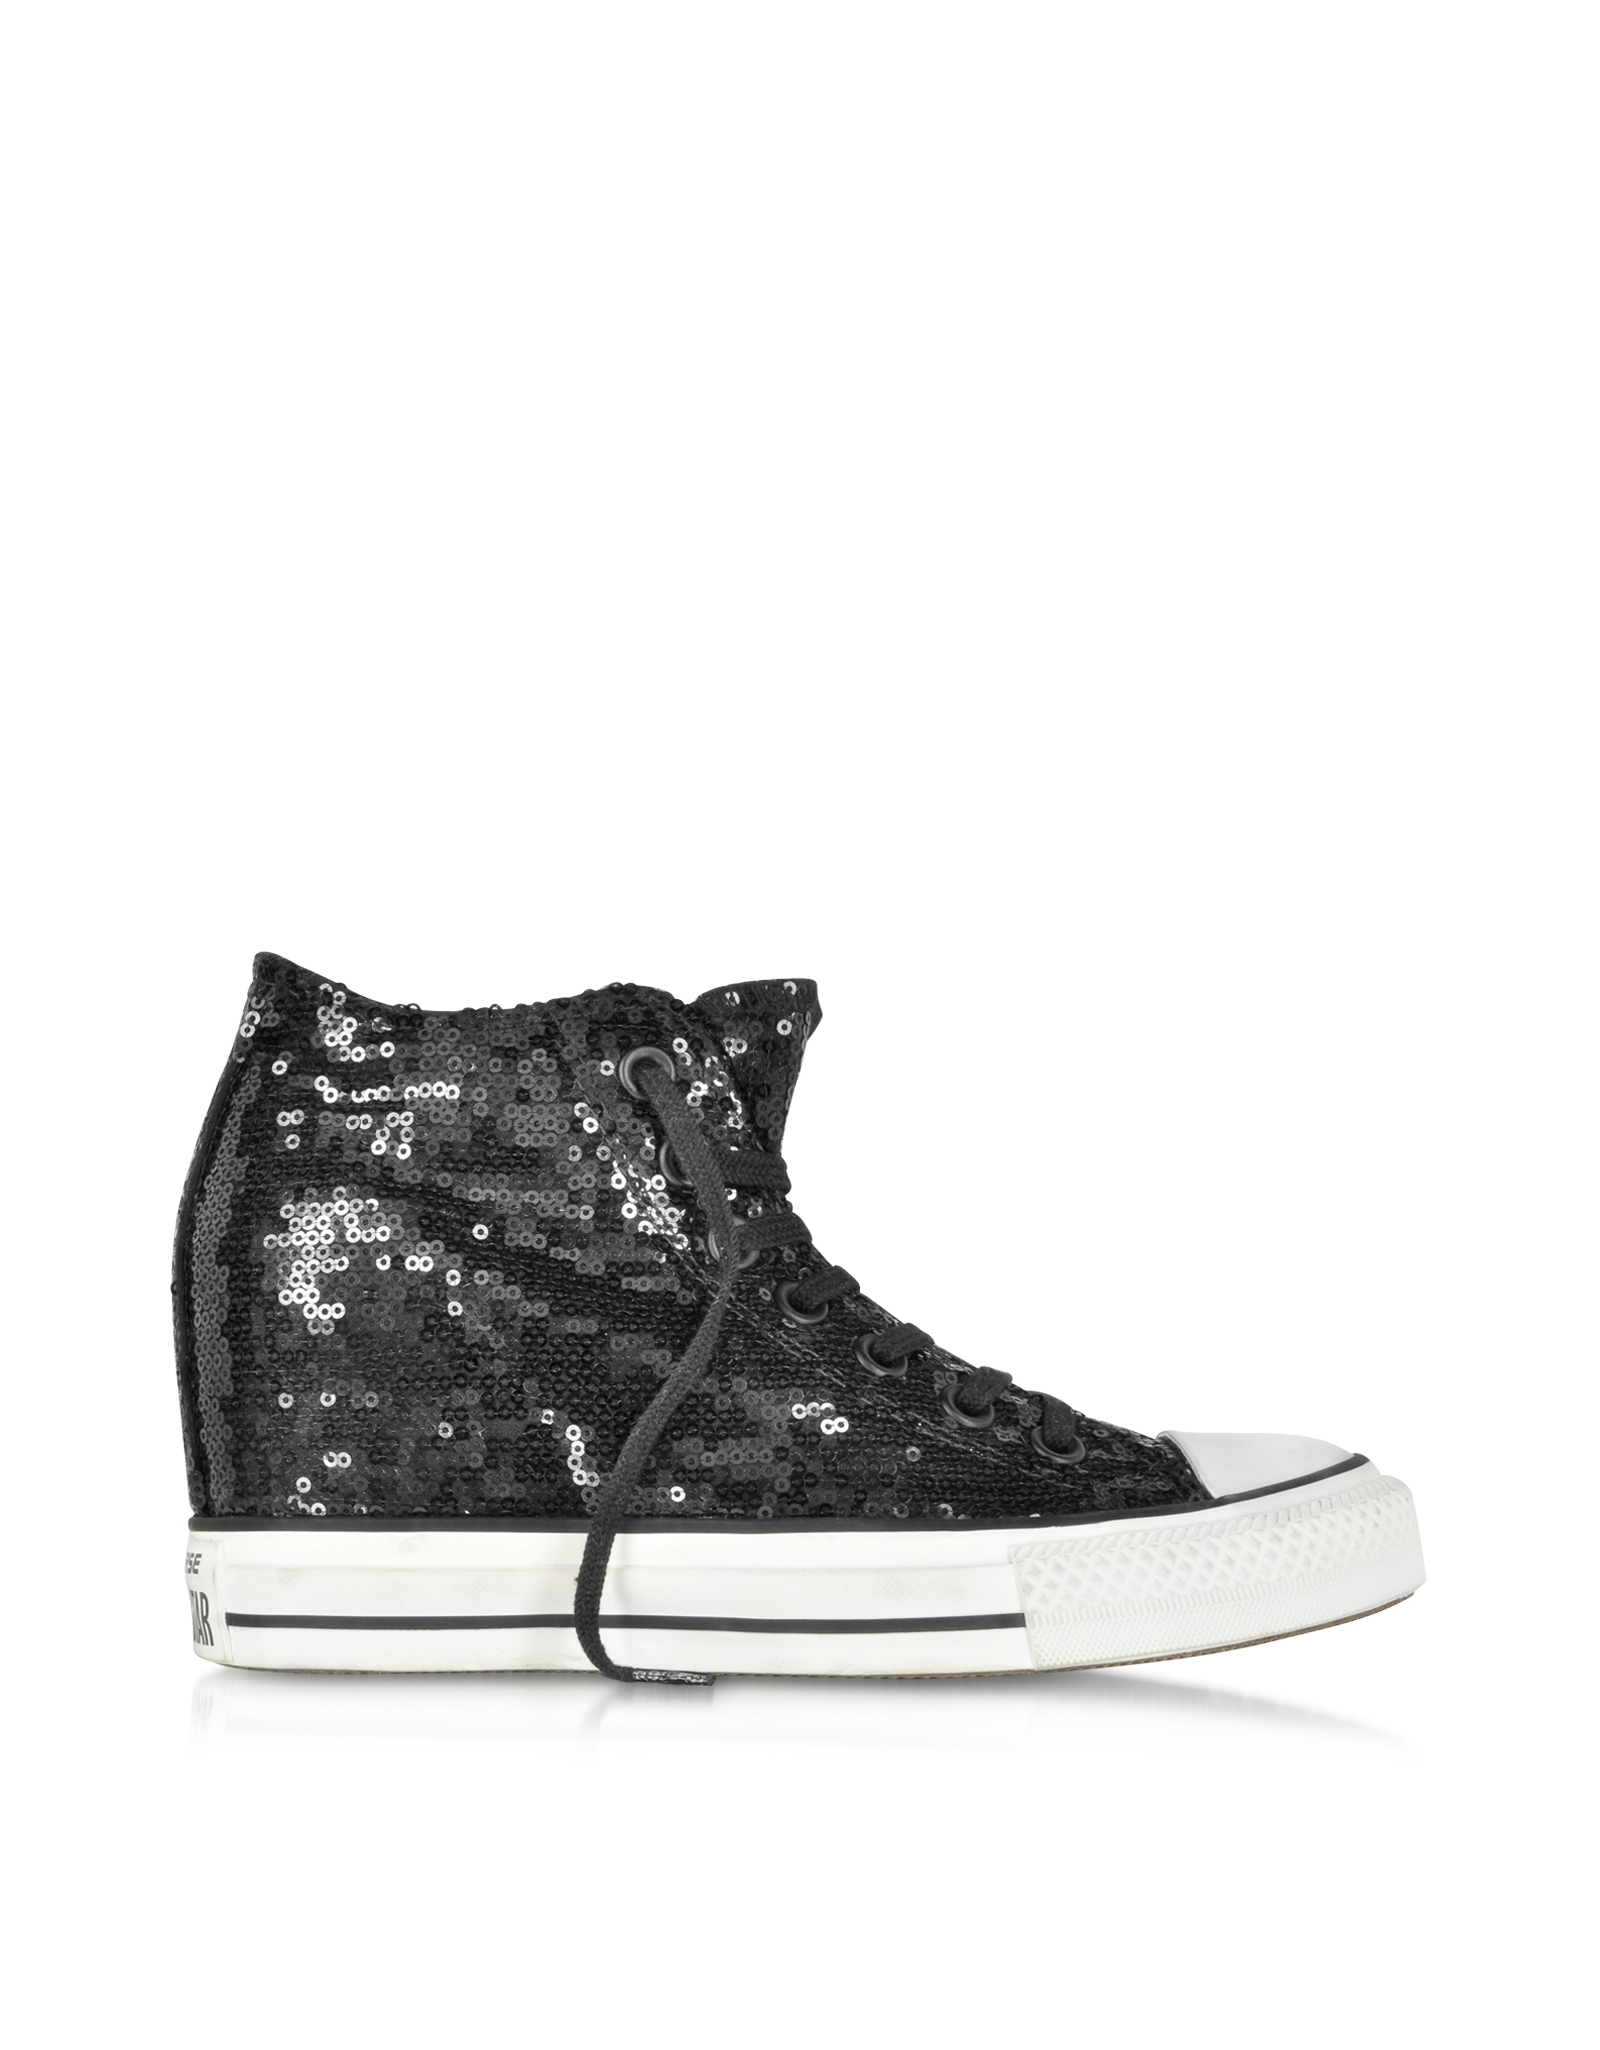 Converse All Star Mid Lux Black Sequins And Canvas Wedge Sneaker - Lyst